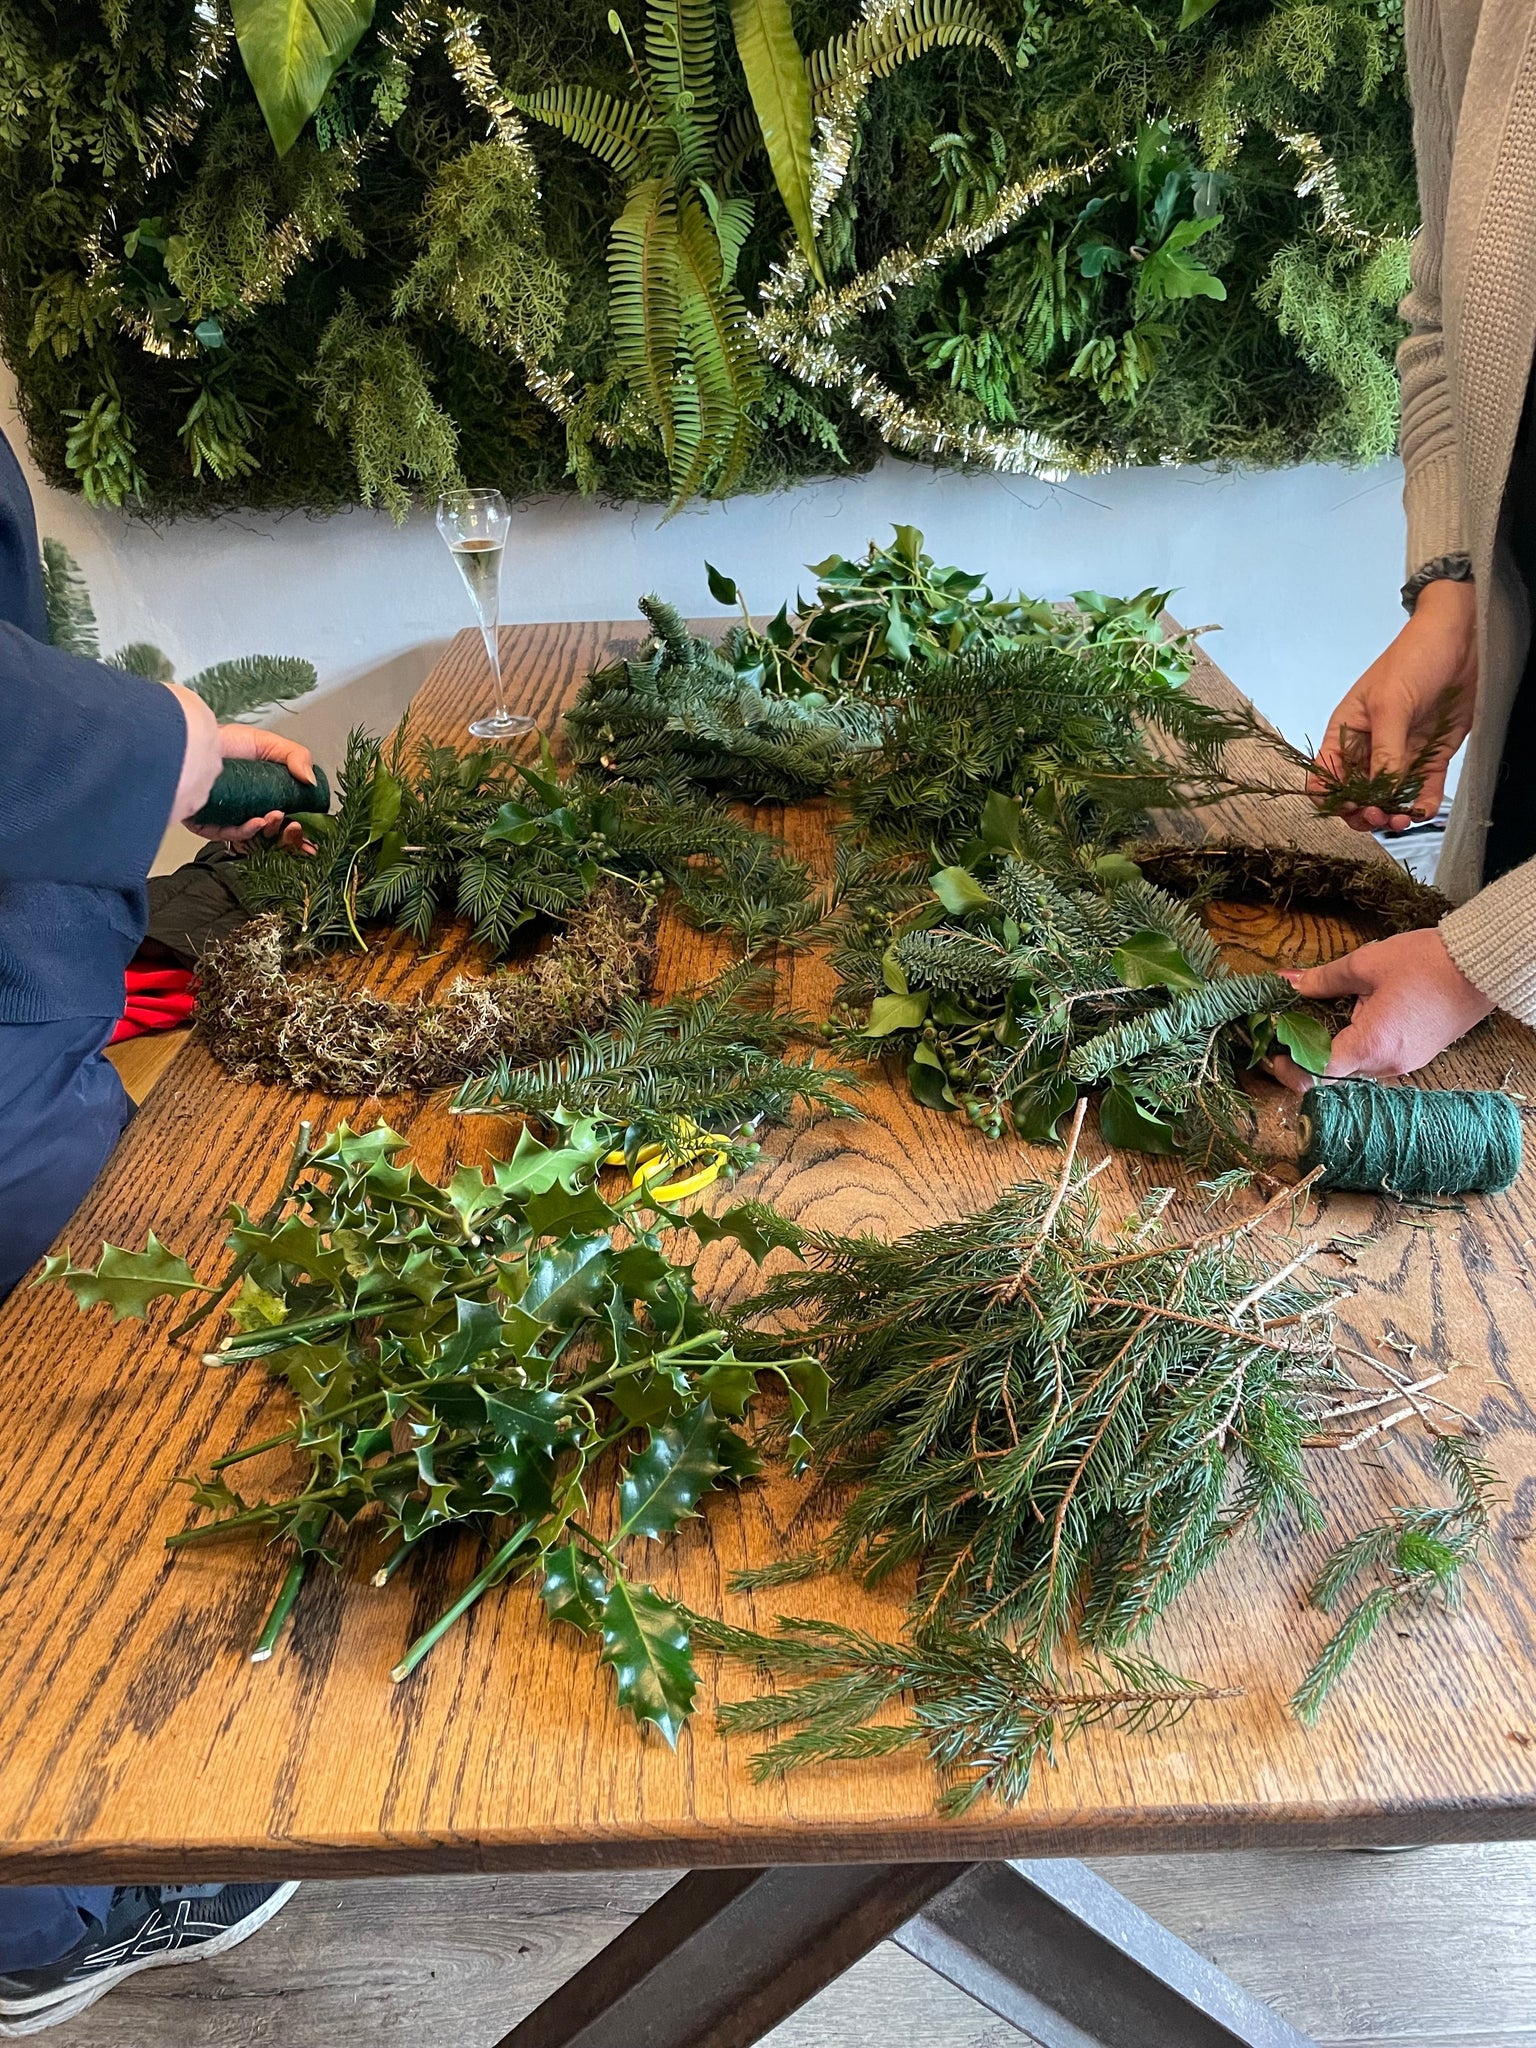 Christmas Wreath Workshop – Thursday 7th December, Starting @ 11am (£75 per person) 2.5 hours